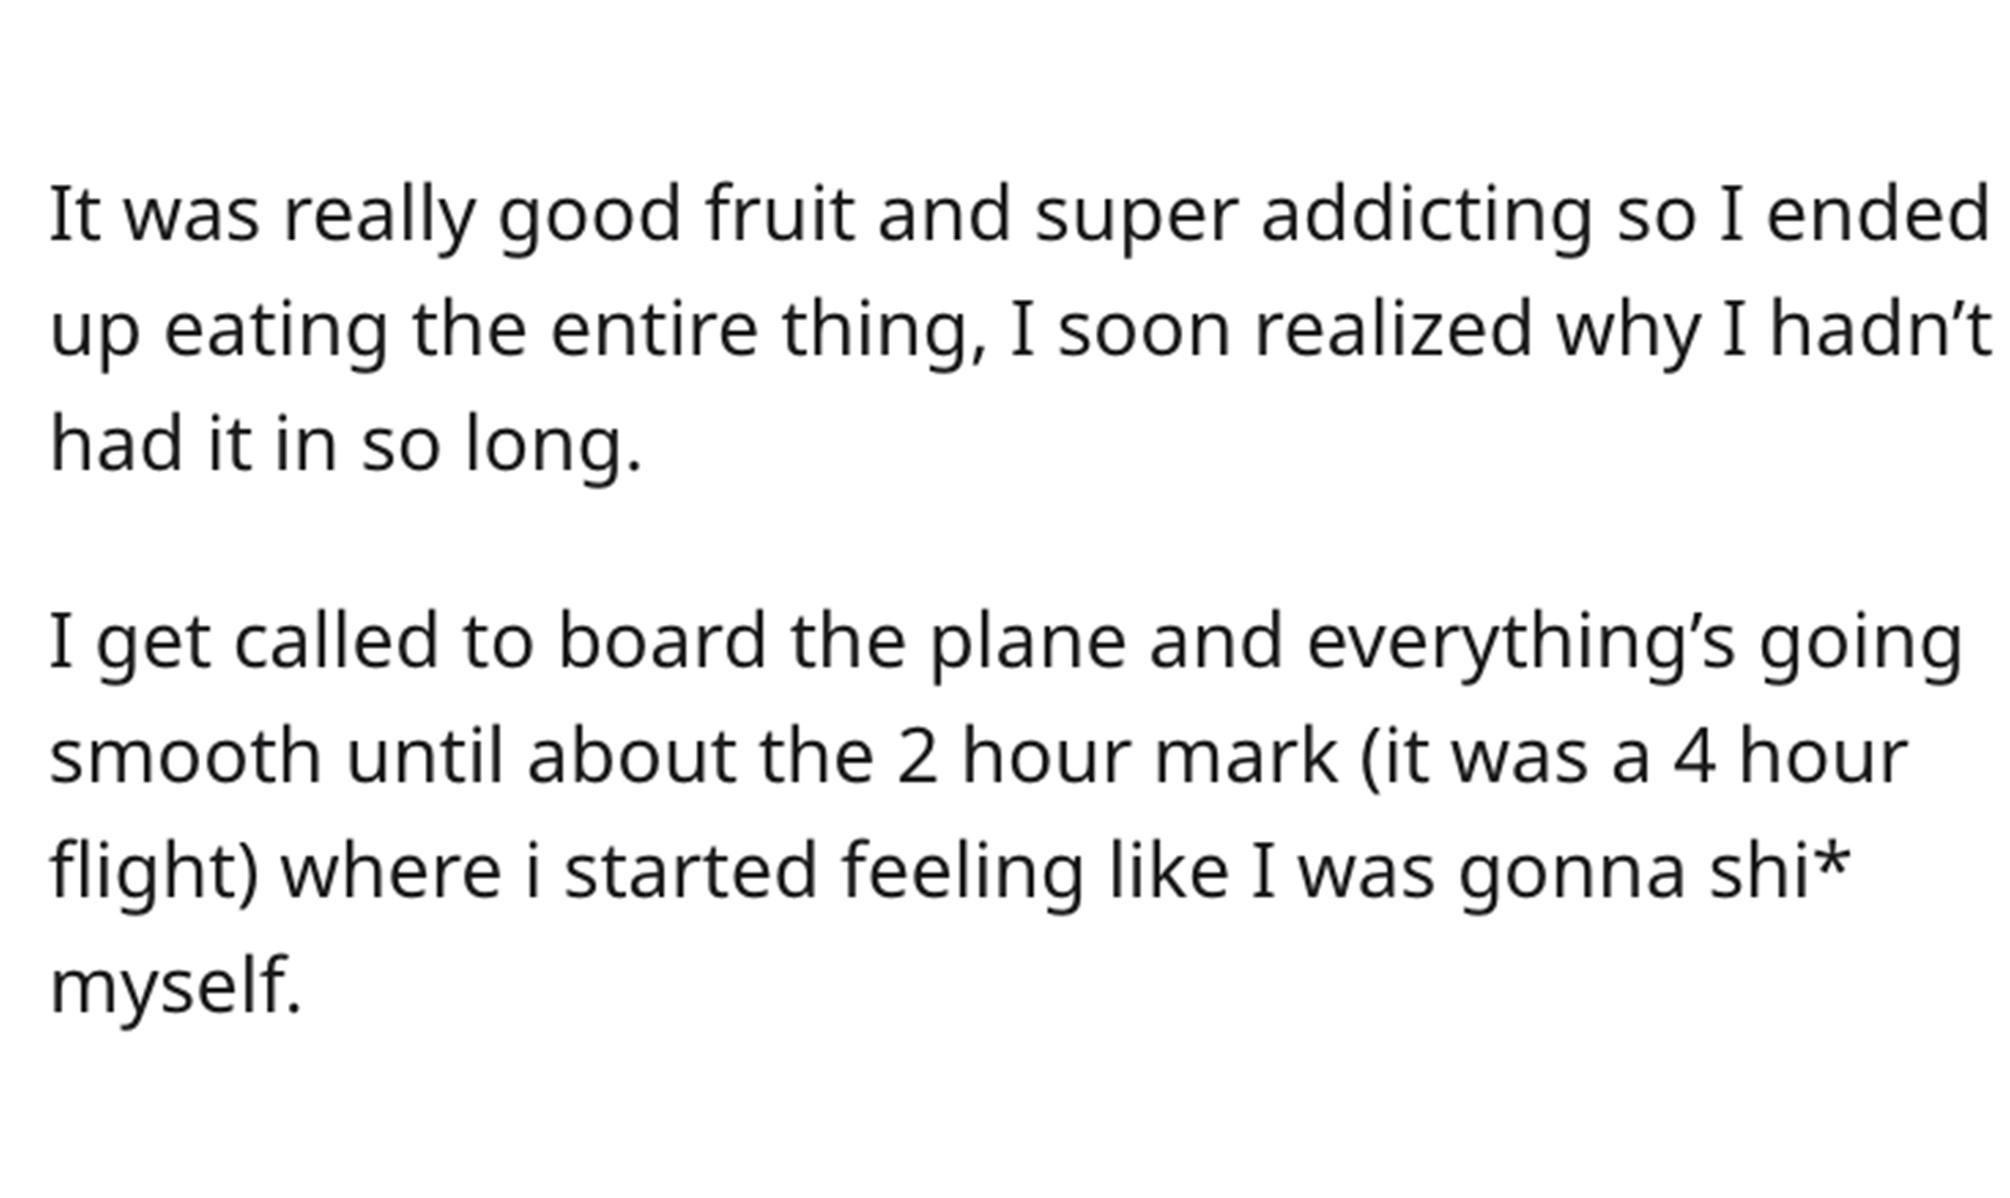 Sharting Mid-Flight - Particle - It was really good fruit and super addicting so I ended up eating the entire thing, I soon realized why I hadn't had it in so long. I get called to board the plane and everything's going smooth until about the 2 hour mark 